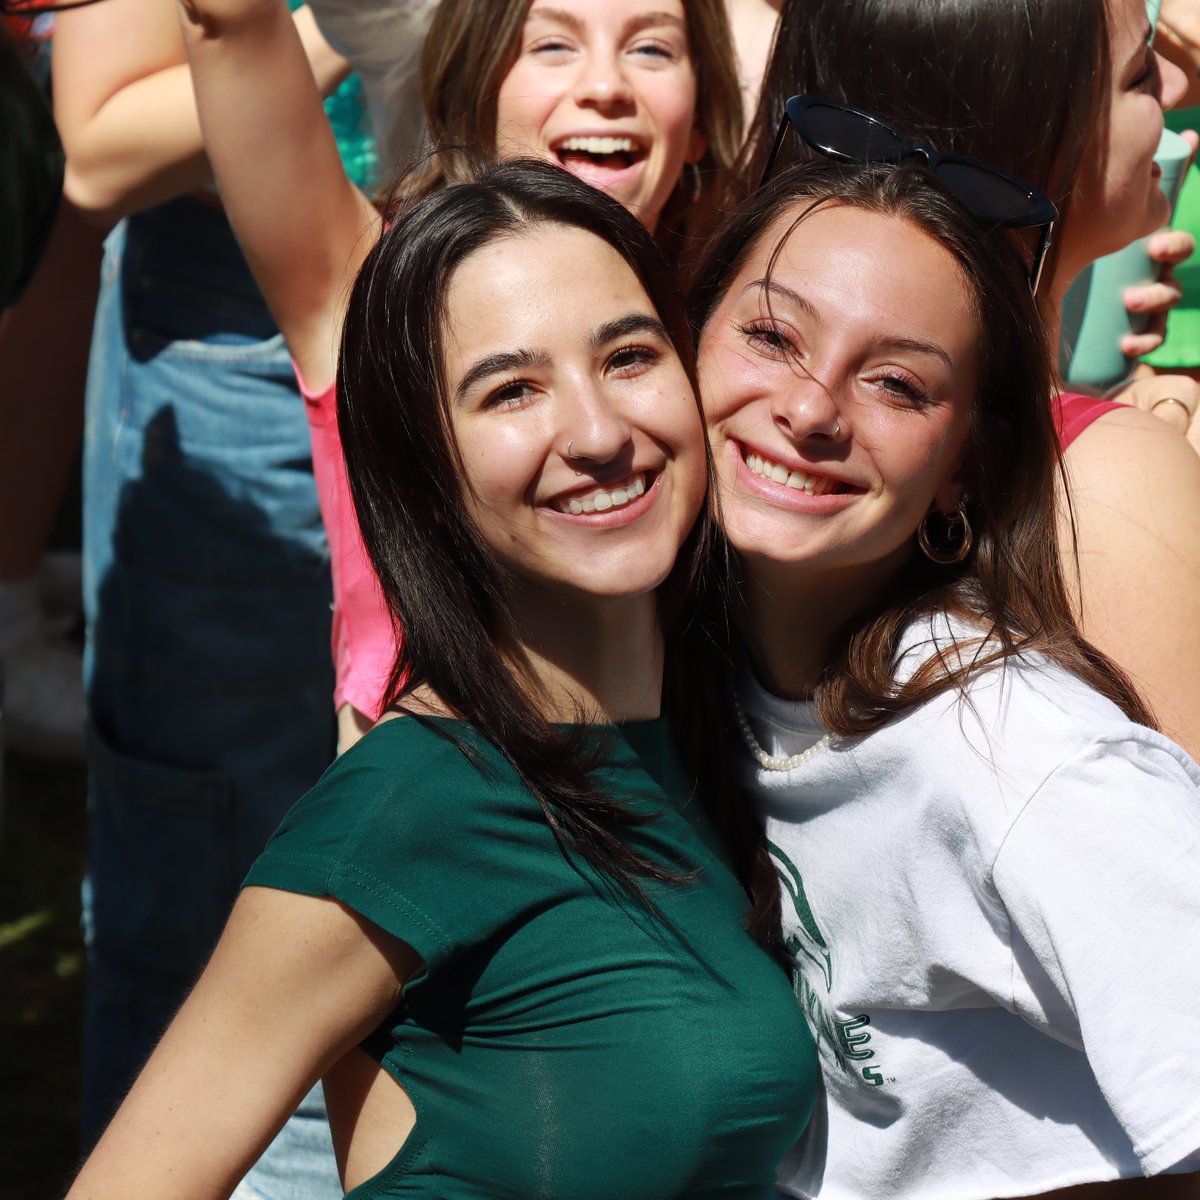 'Here at Le Moyne, you can expect a visit that you won’t forget & you’ll have so many people offering to help you along on your journey.' See first-year, transfer & graduate students opportunities (plus events for accepted students). Plan your visit today! cstu.io/8ea566